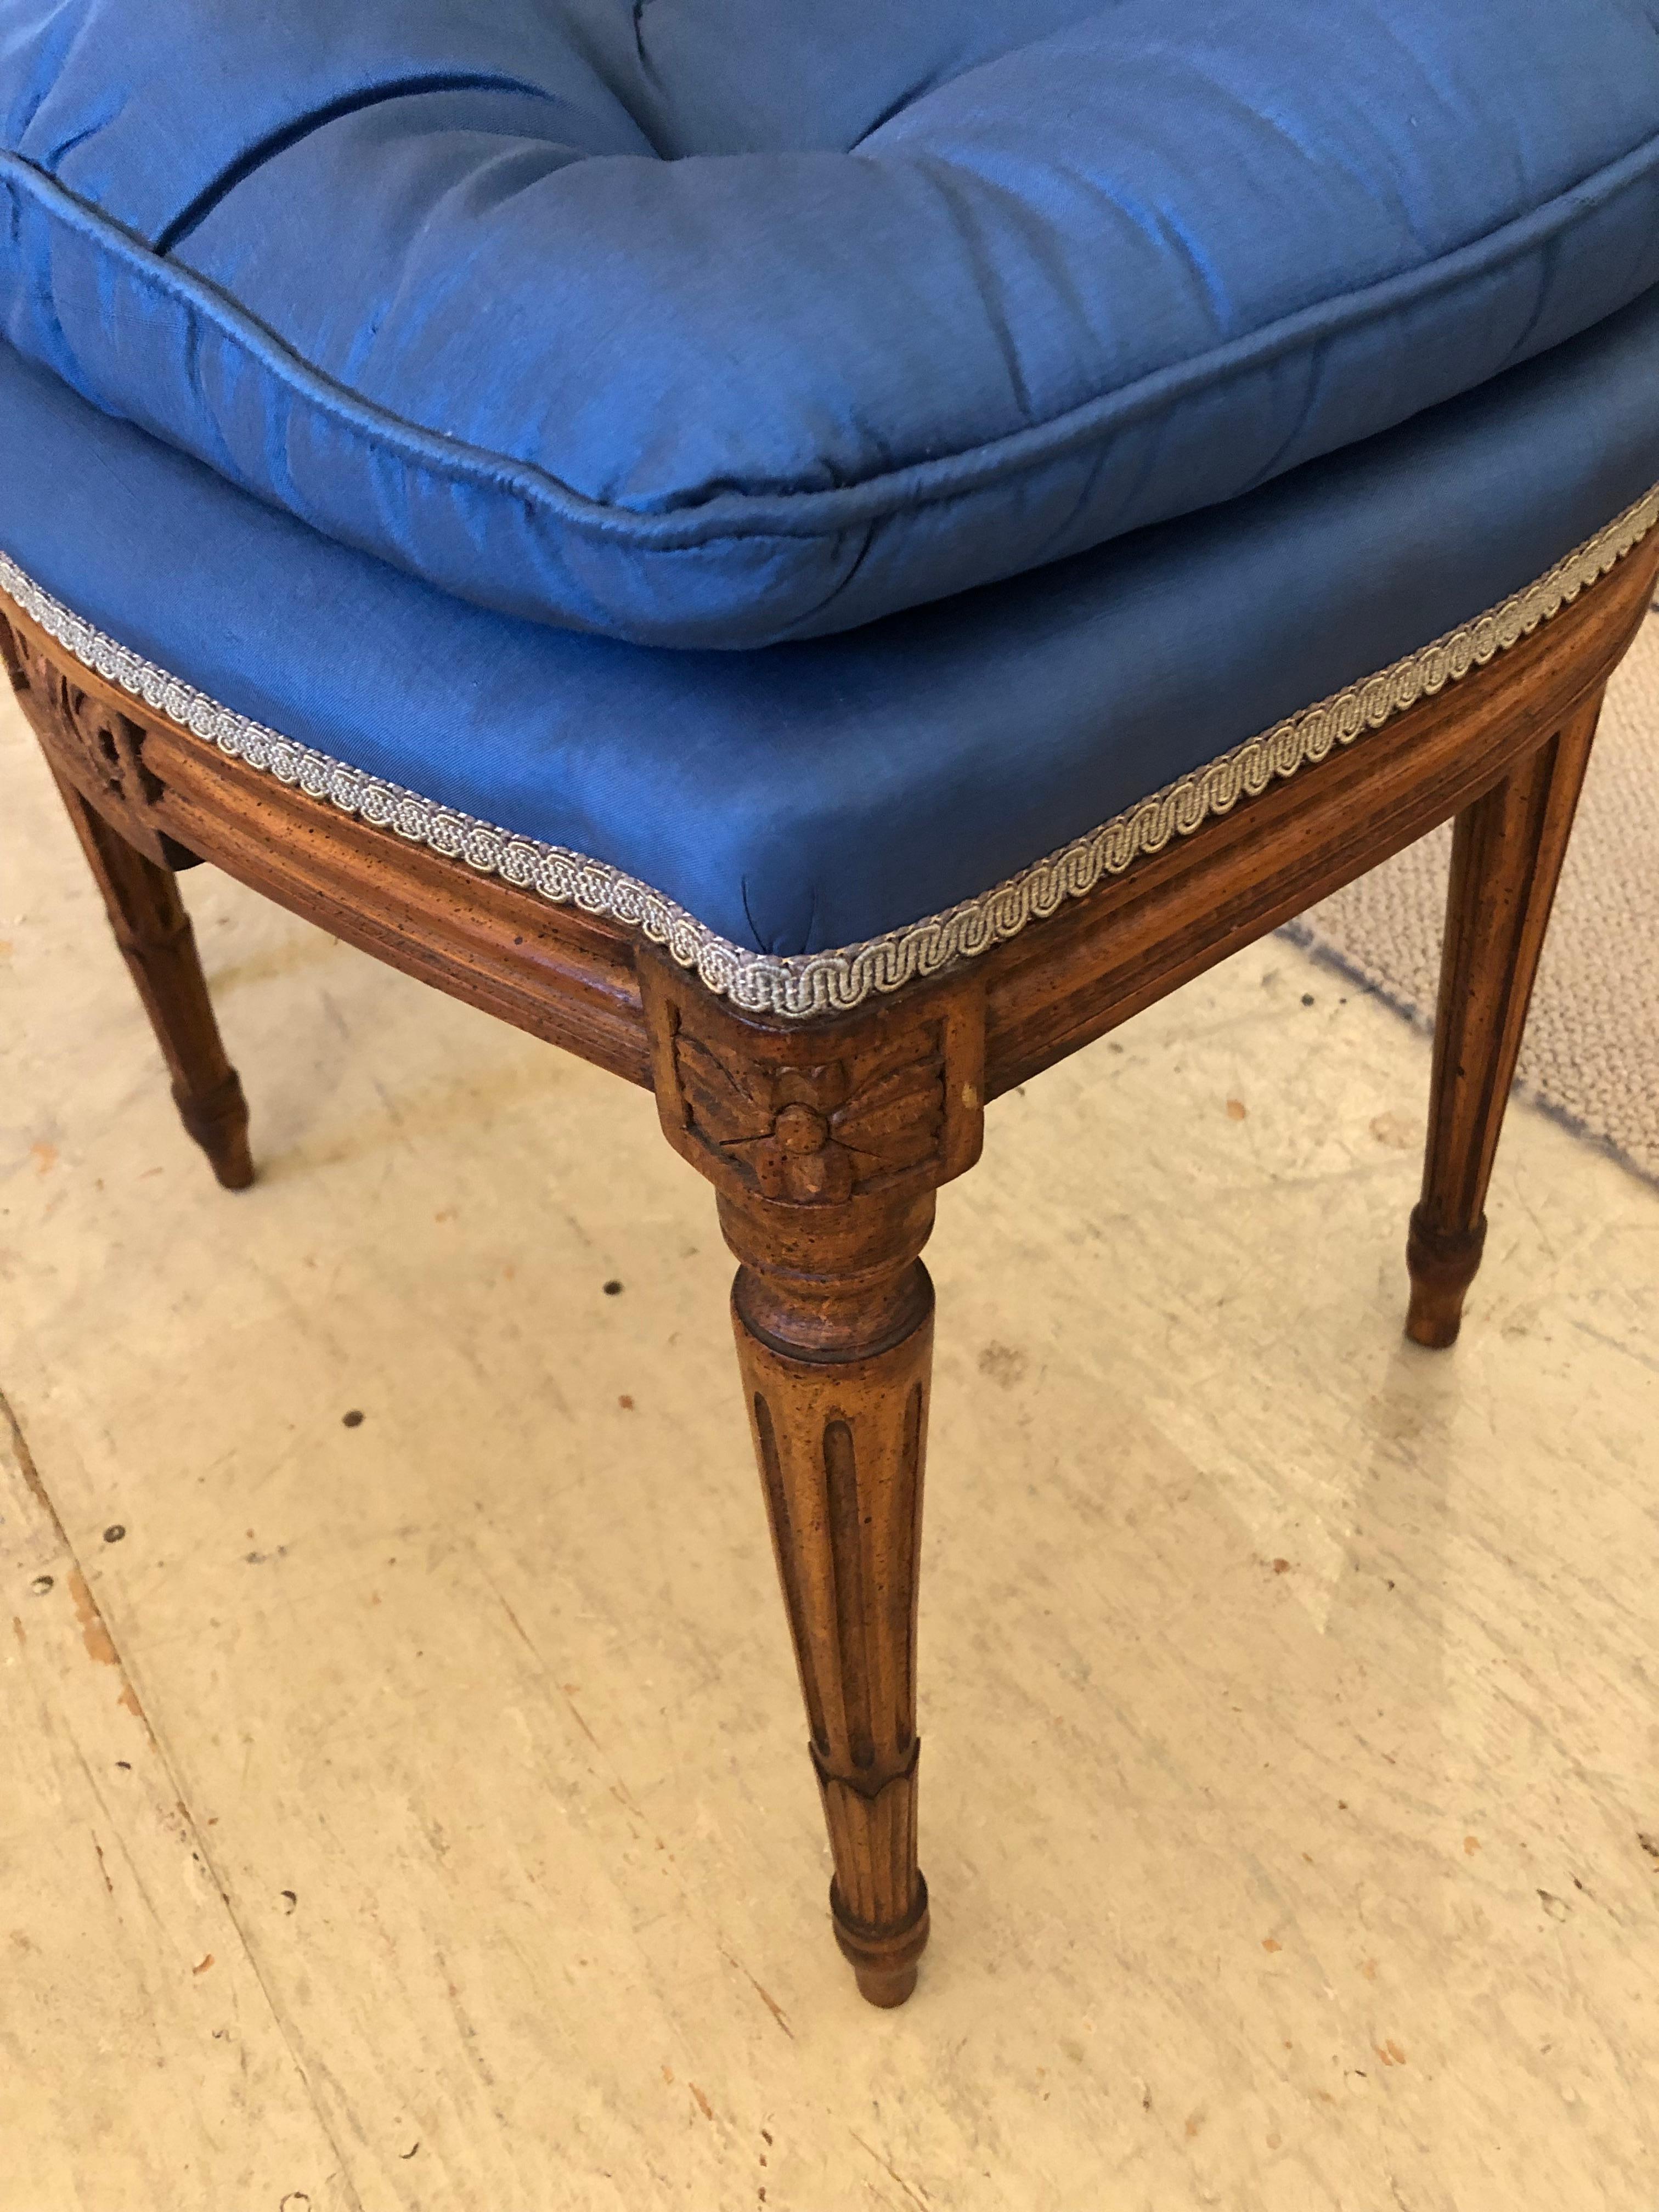 Elegant Pair of Antique Carved Wood and Cobalt Blue Upholstered Salon Chairs 1